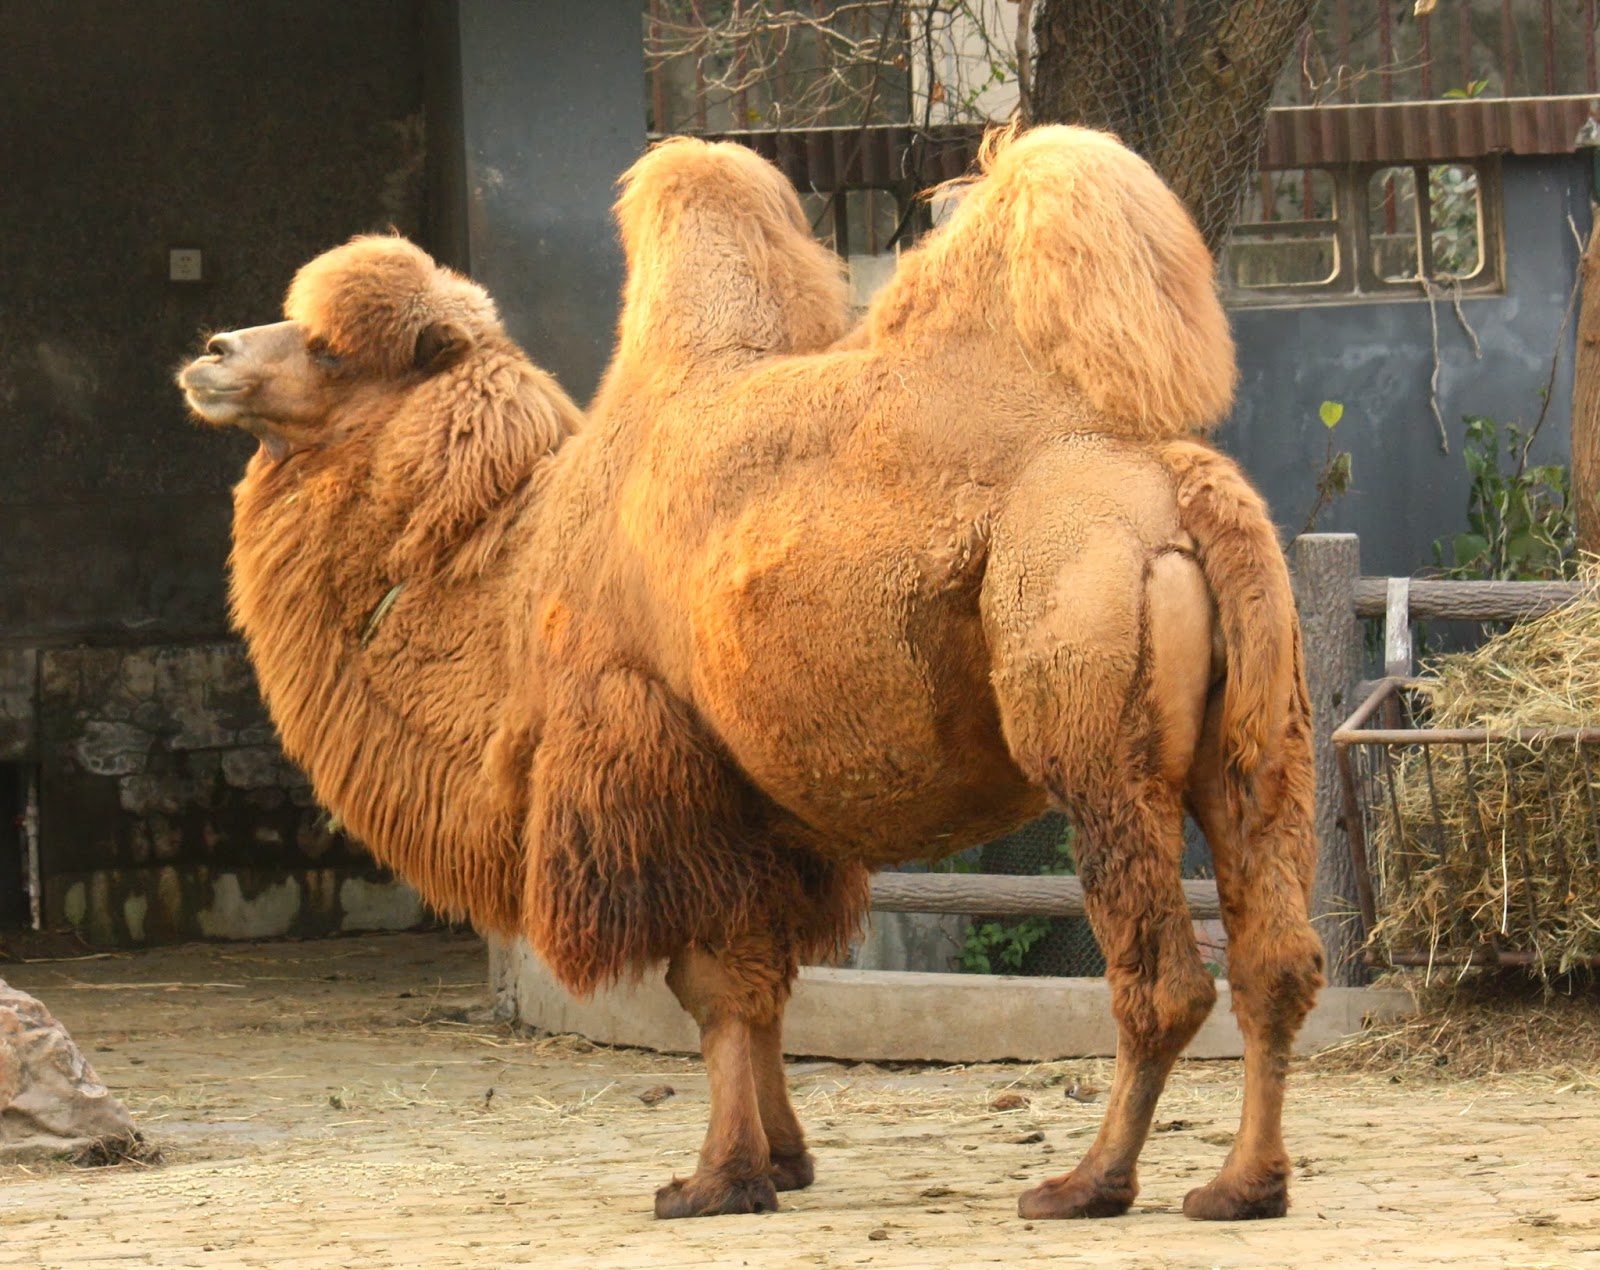 Camels do not store water in their humps. The myth was started by Pliny the Elder, who apparently lied a lot in one of the first encyclopedias, between 23-79 AD. Learn more on <a href="http://www.nationalgeographic.com/weepingcamel/thecamels.html" target="_blank">National Geographic</a>.